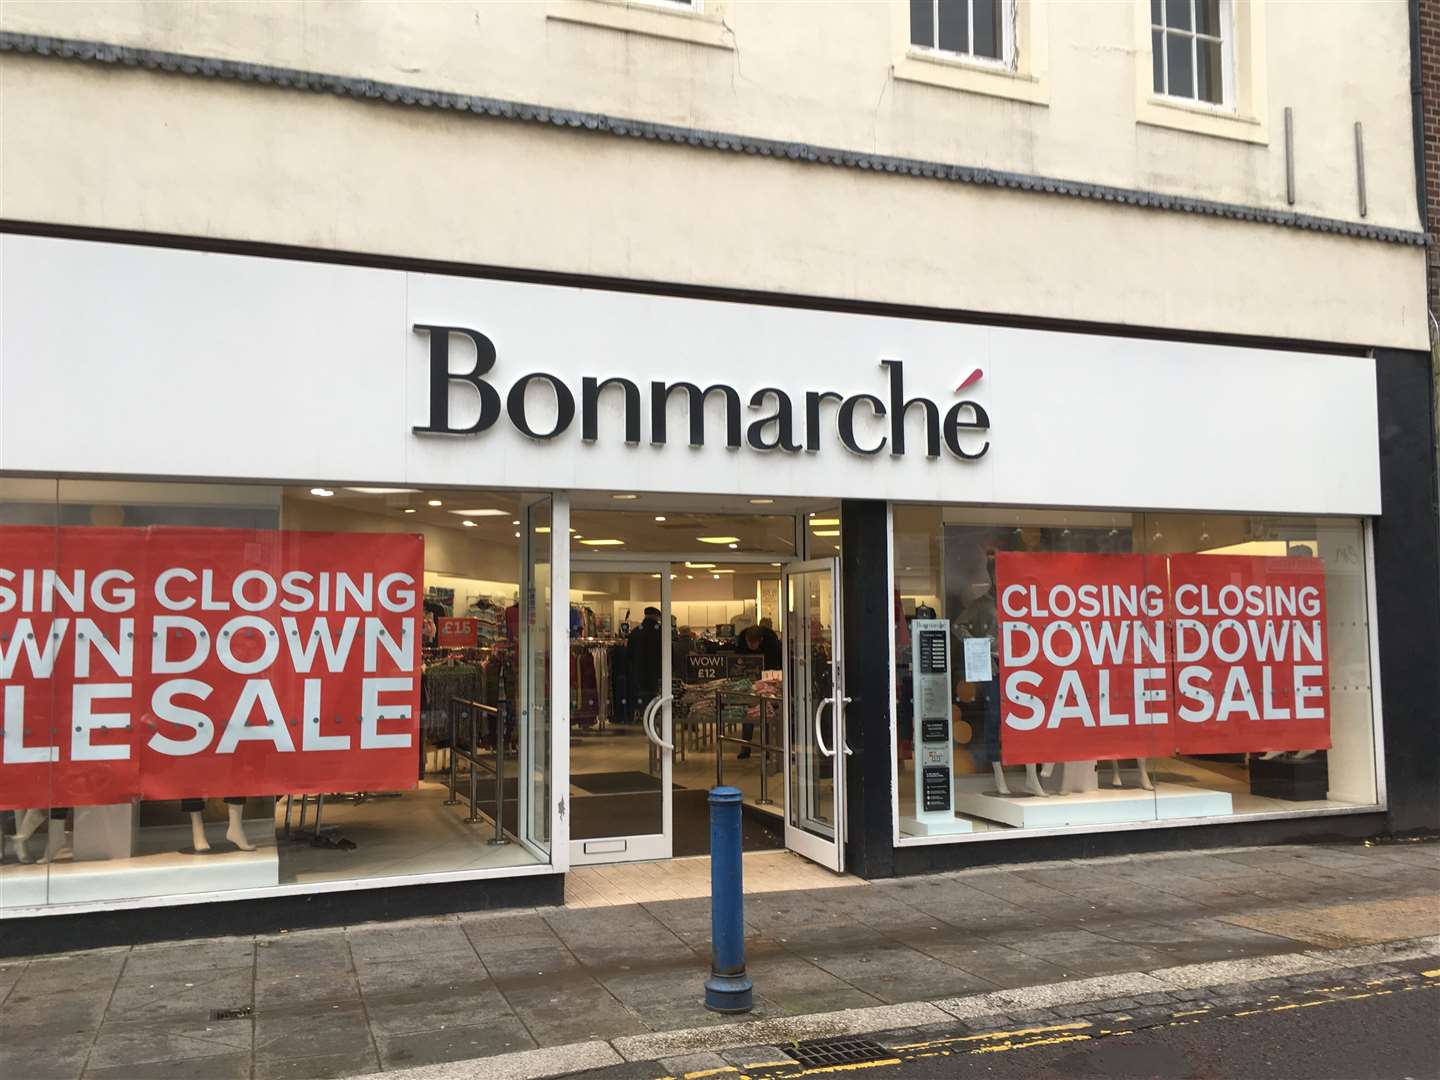 The Sheerness High Street store is also featuring the closing down decals